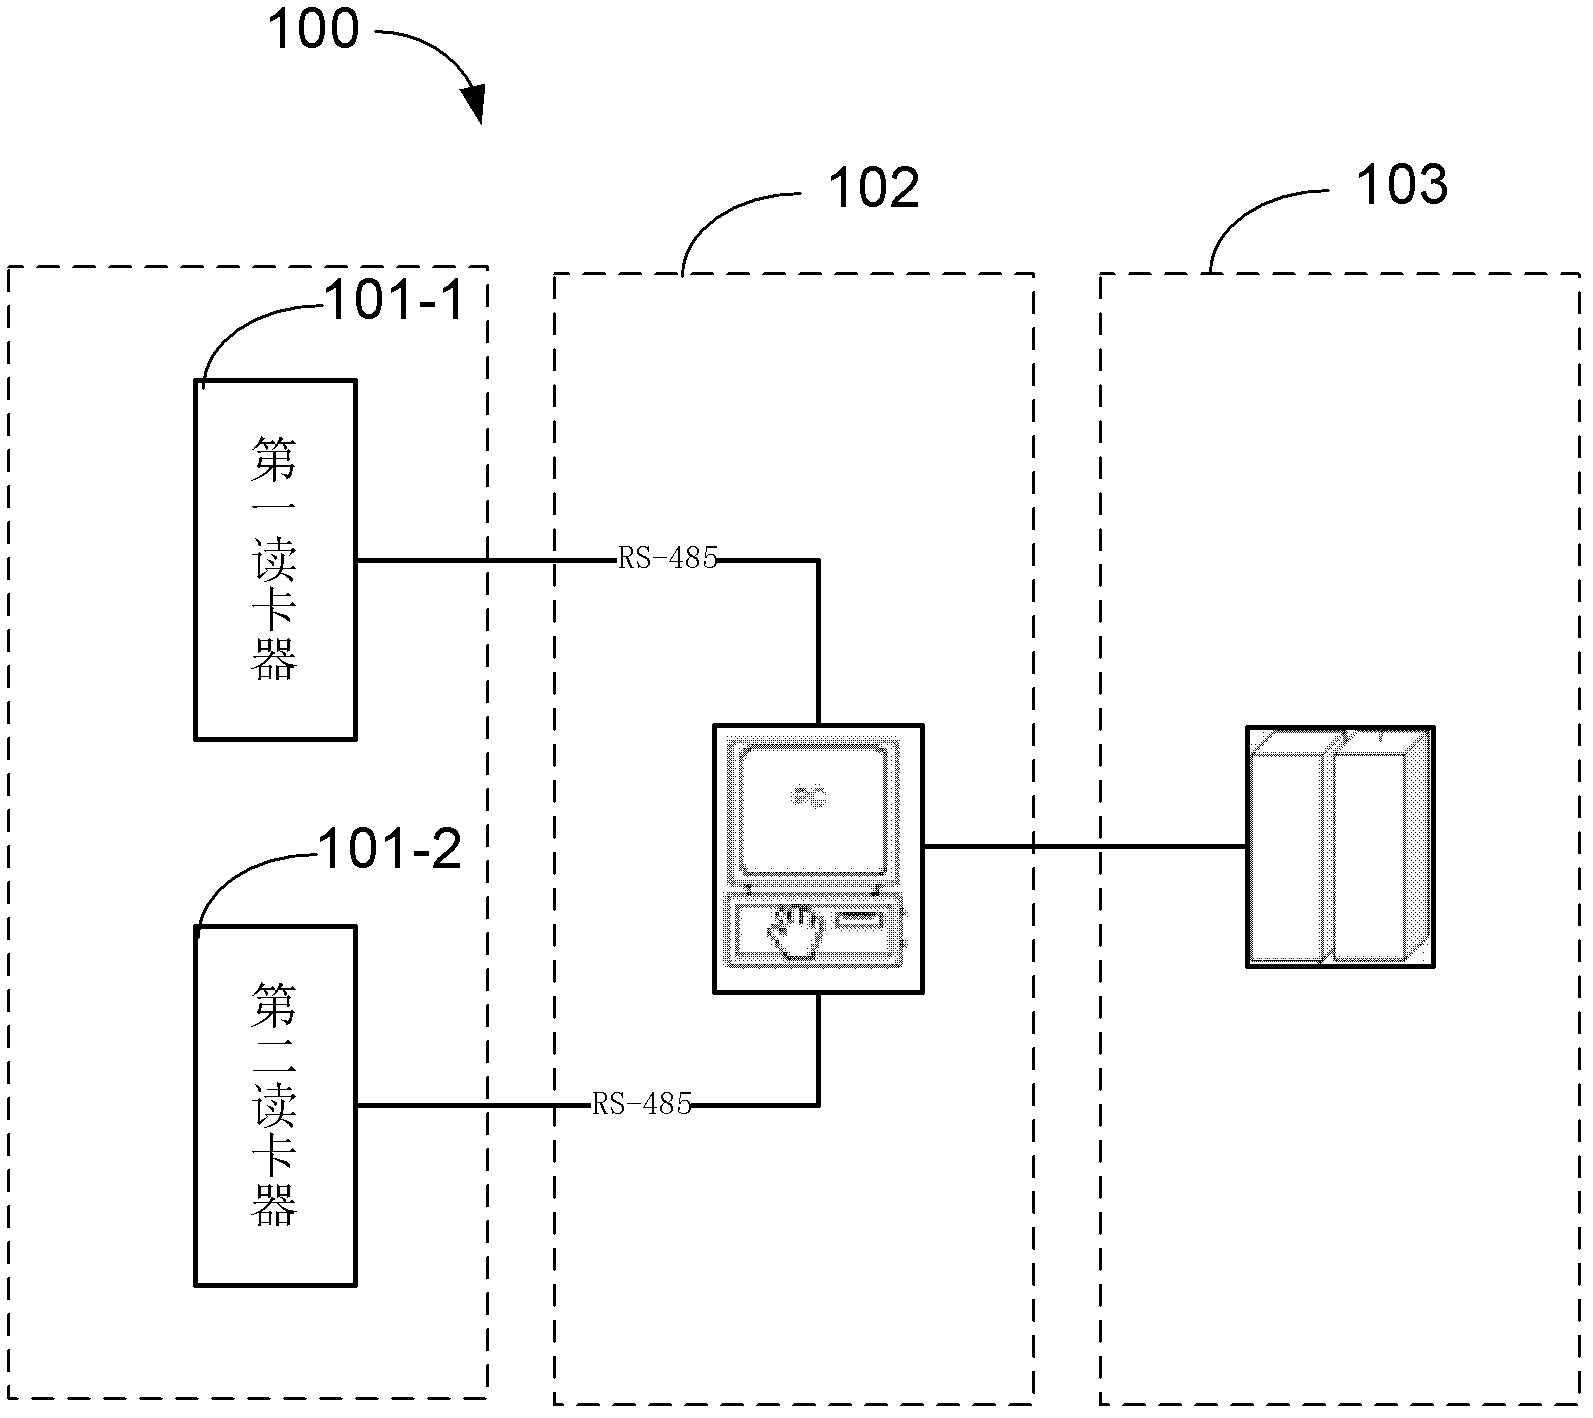 Radio frequency identification system applied to identifying get-in state and get-out state